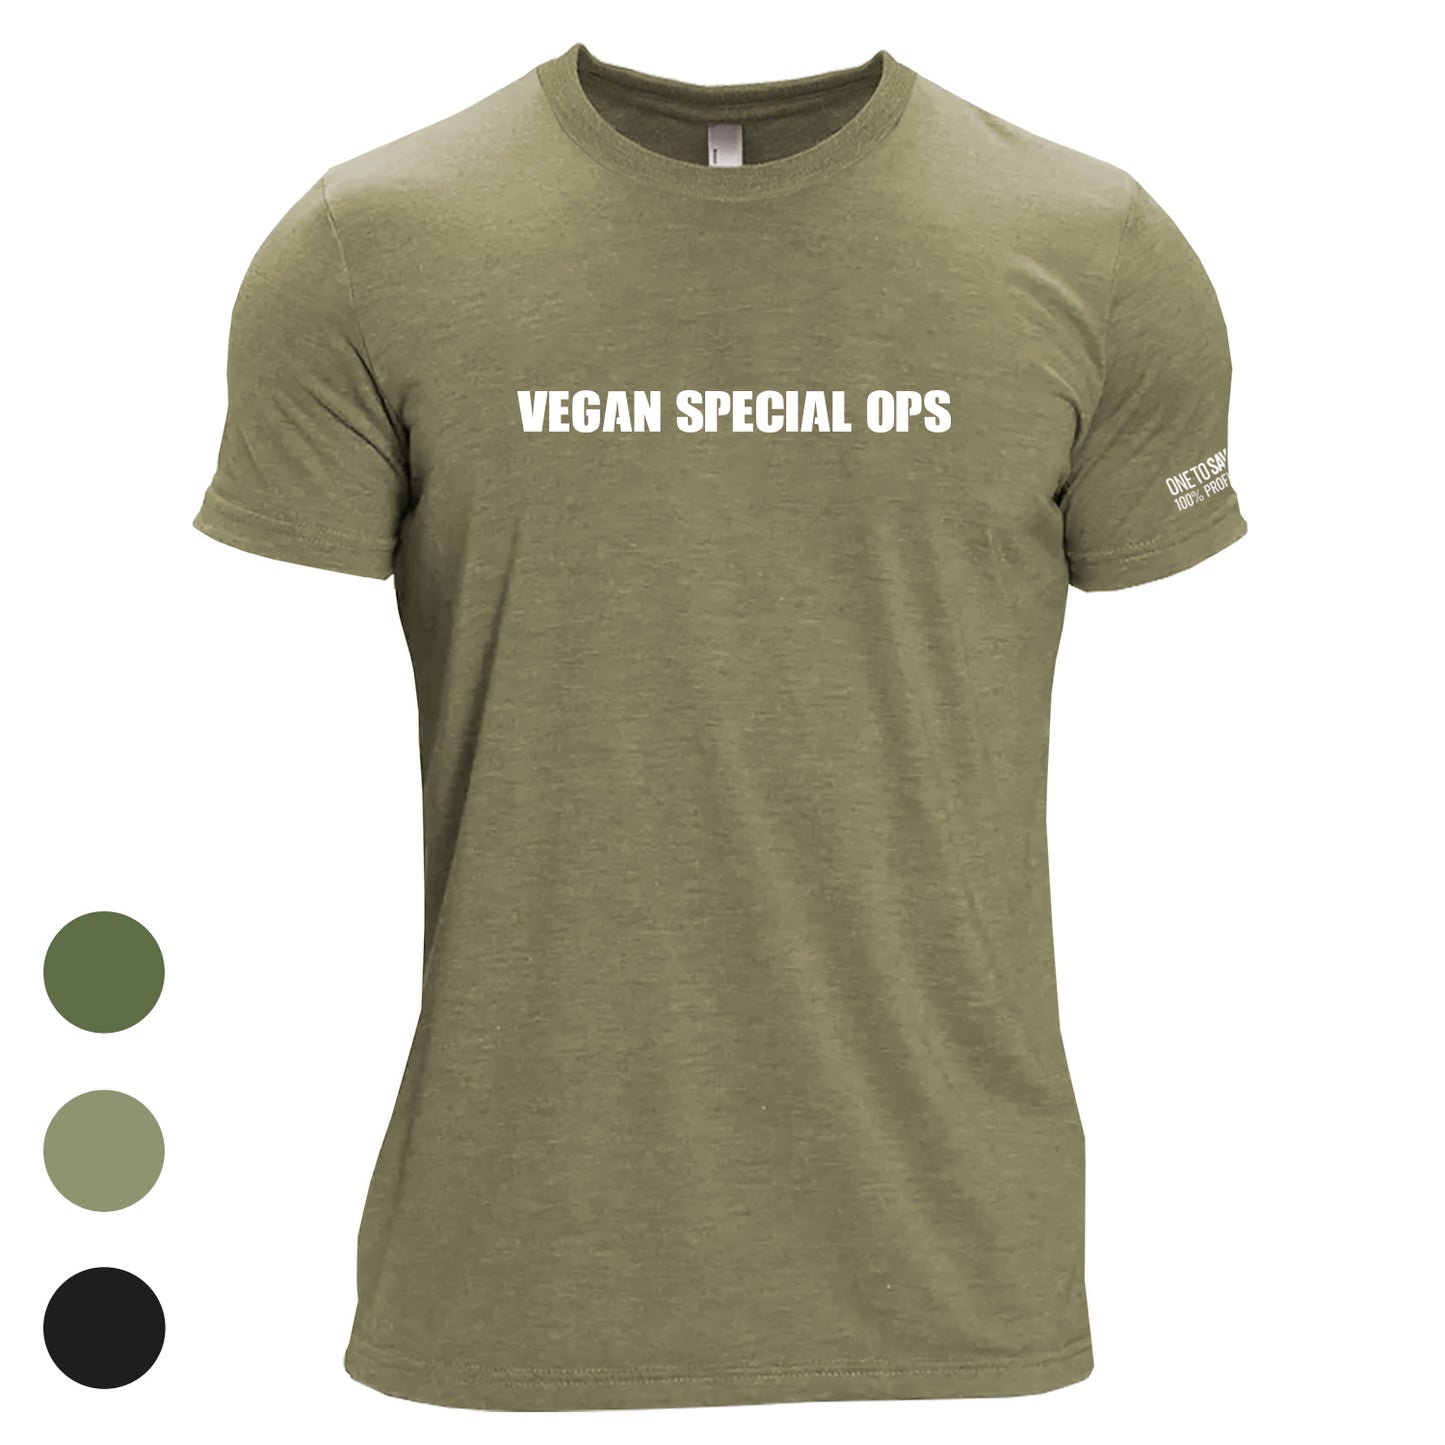 Unisex Vegan Special Ops Tri-Blend T-Shirt - Available in 3 Colors